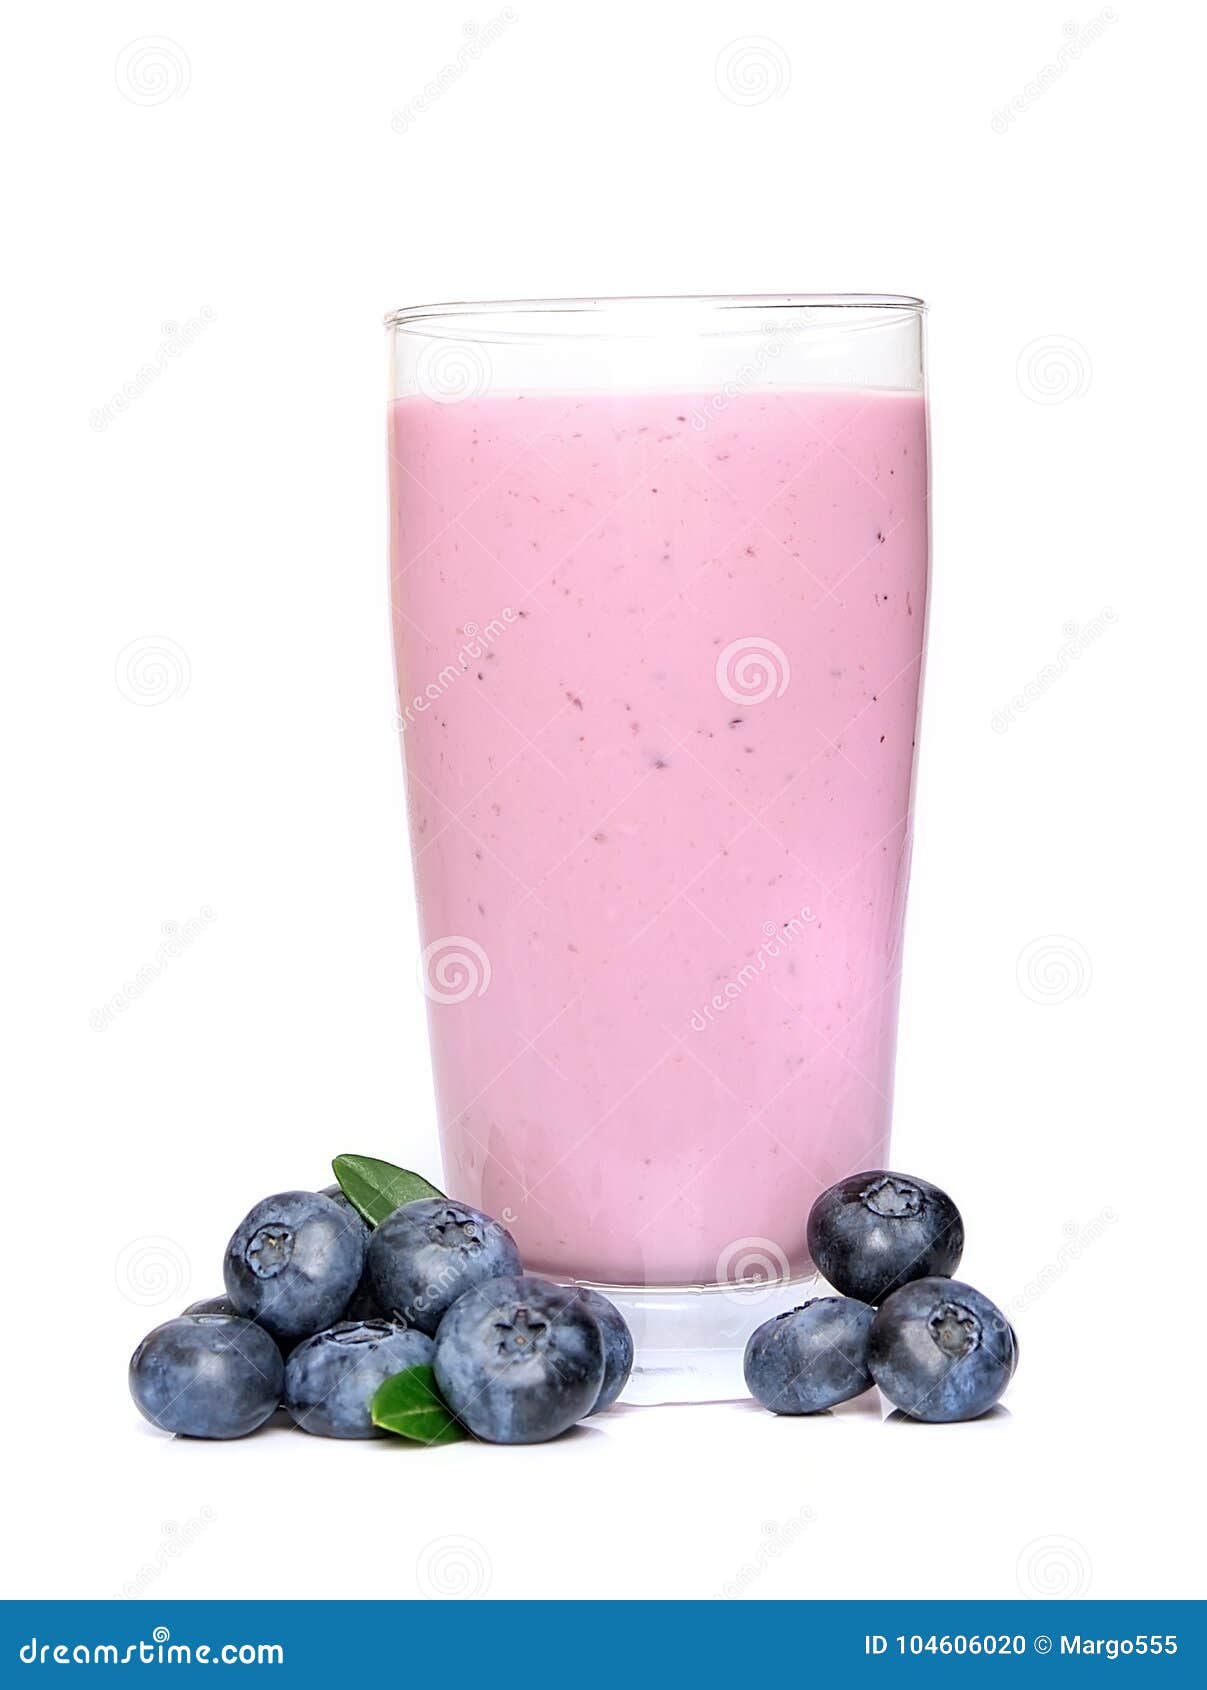 fresh blackberries fruits and smoothies